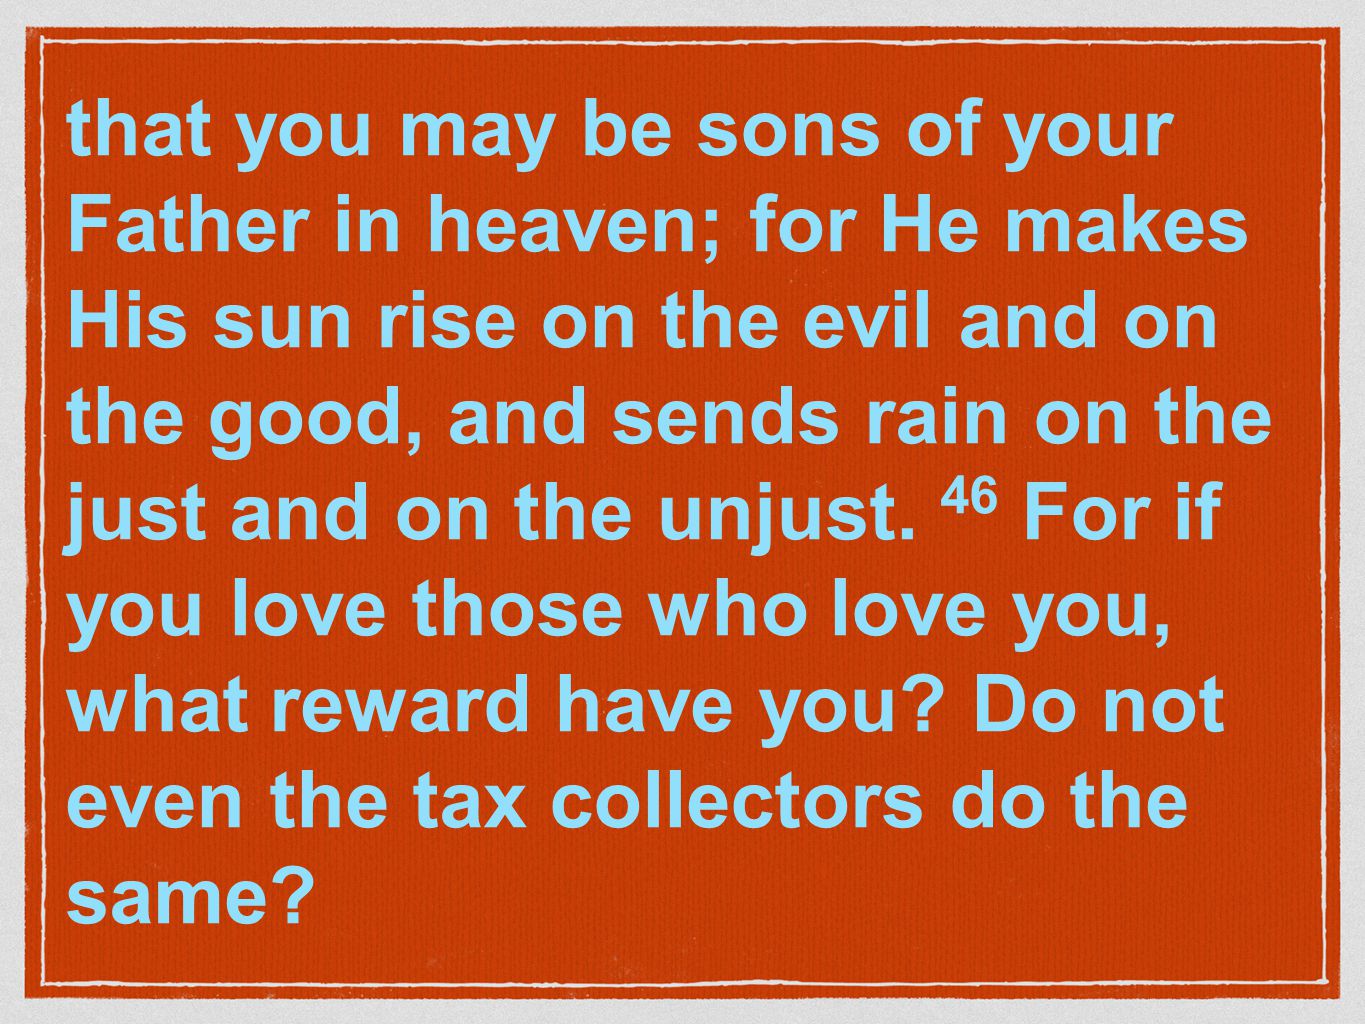 that you may be sons of your Father in heaven; for He makes His sun rise on the evil and on the good, and sends rain on the just and on the unjust.